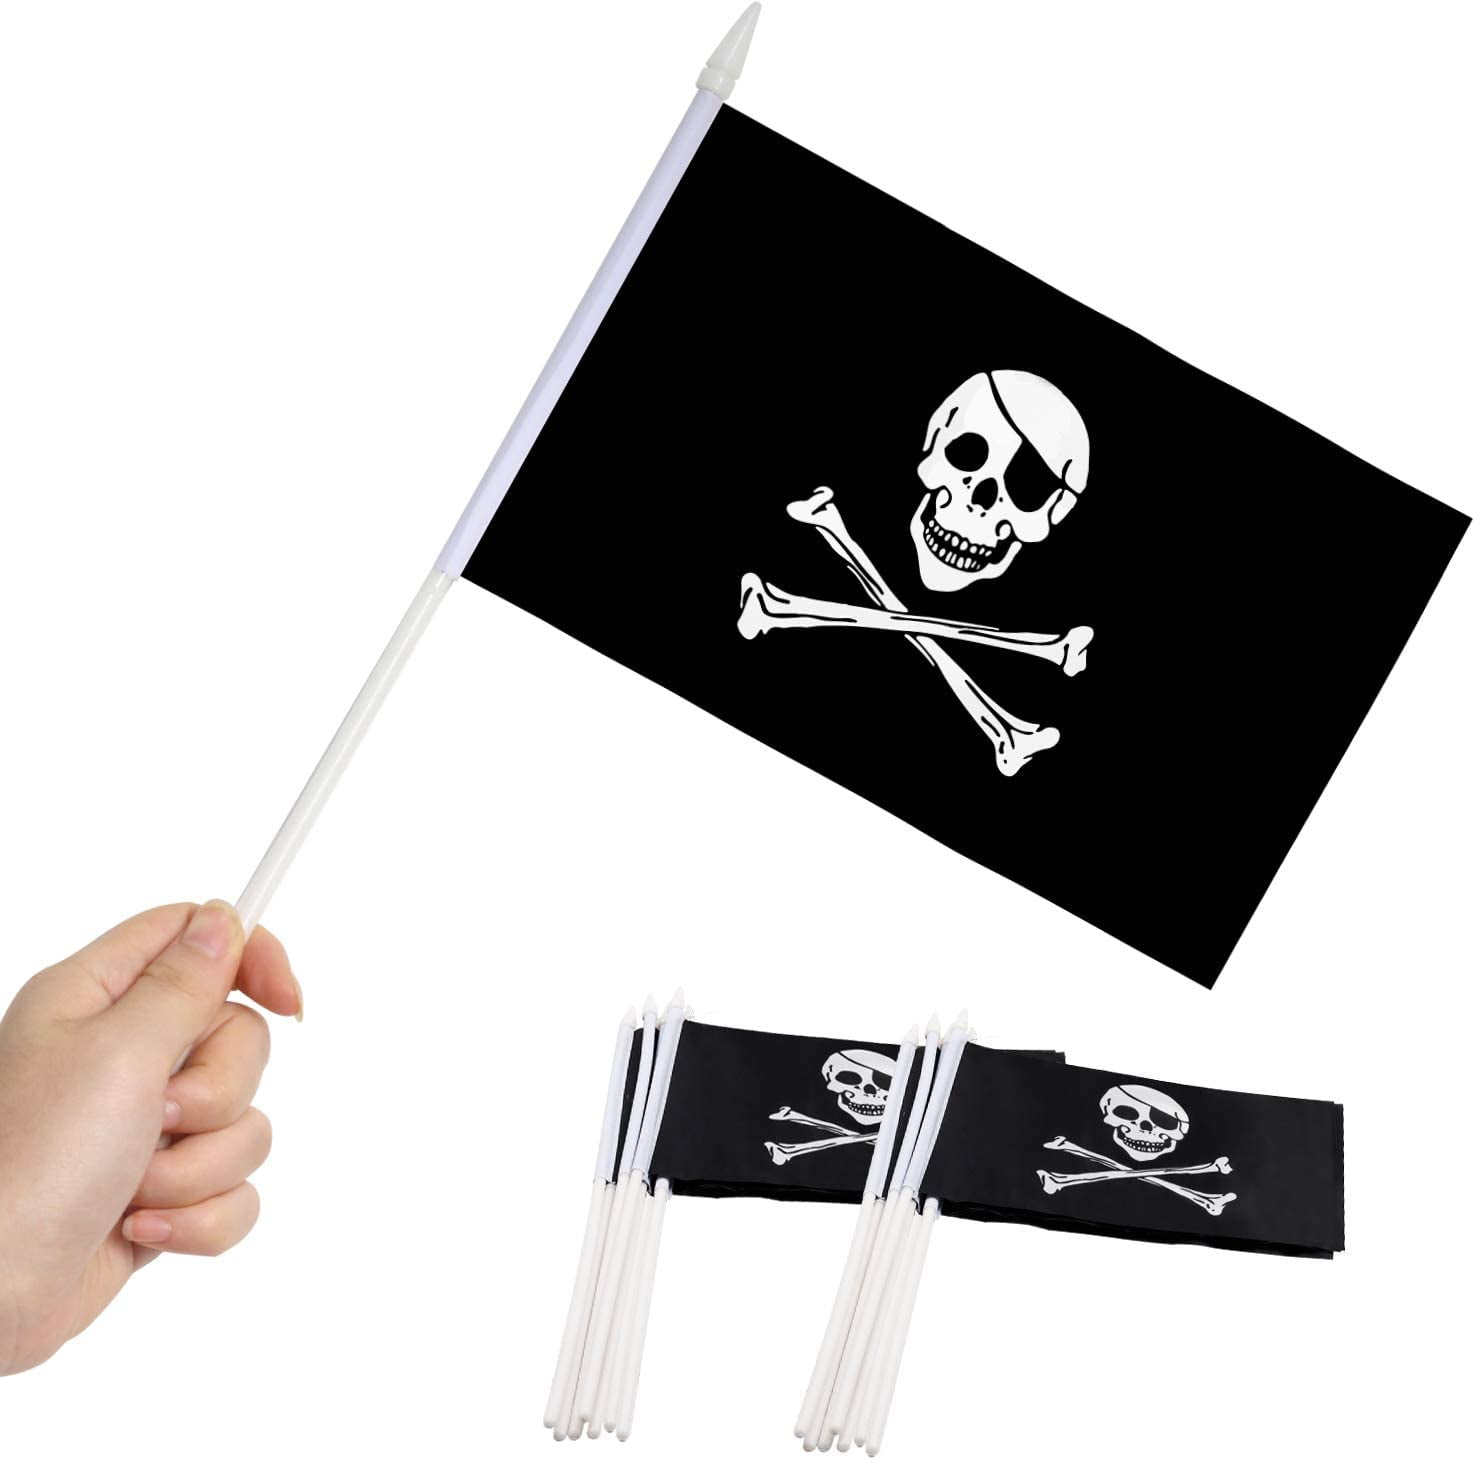 3x5 Jolly Roger Pirate Pirates Only No Trespassing 100D Nylon 3'x5' Flag Banner